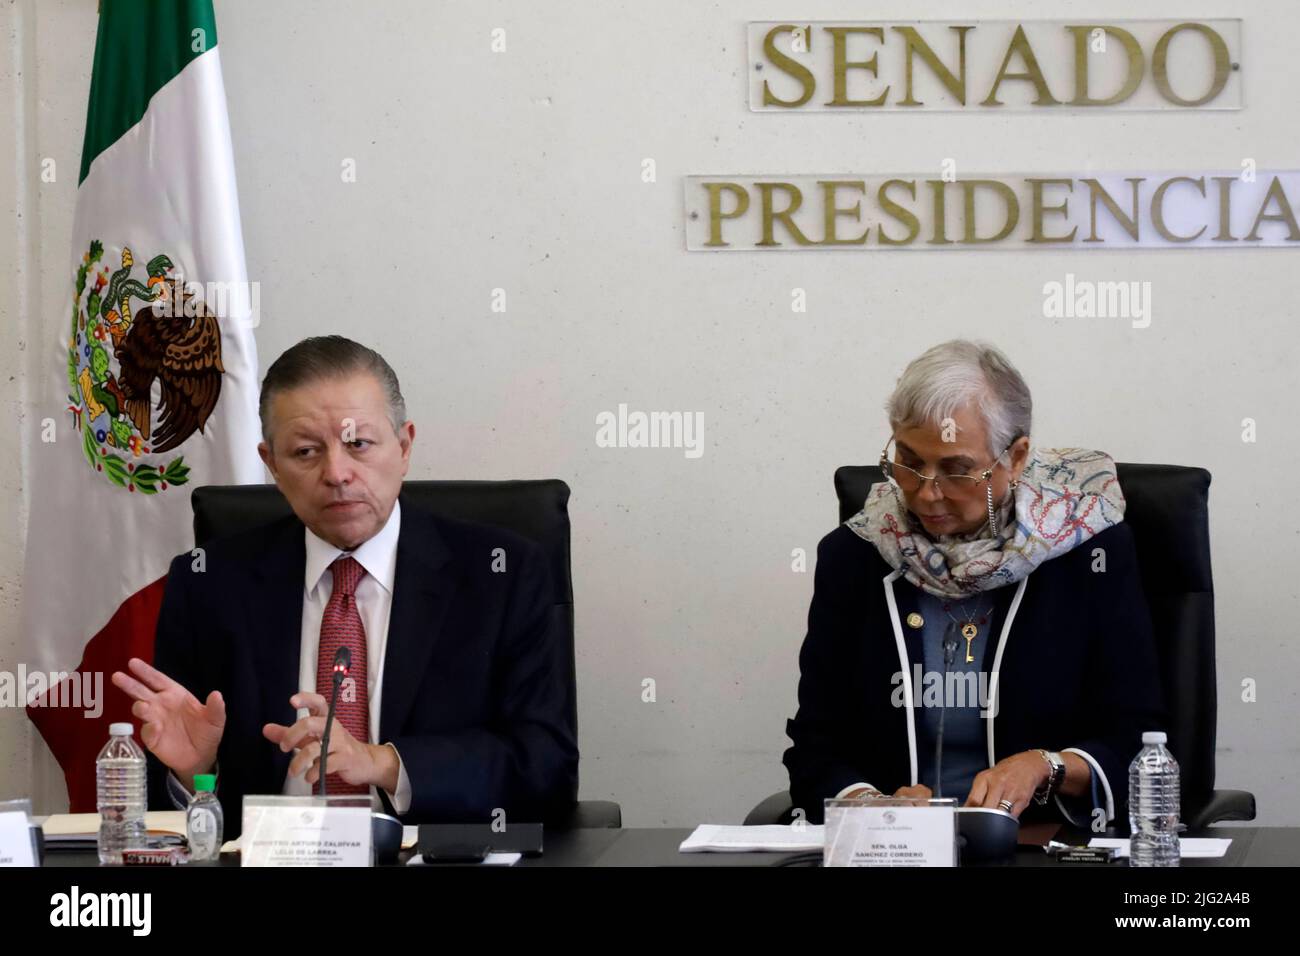 Mexico City, Mexico City, Mexico. 6th July, 2022. July 6, 2022, Mexico City, Mexico: The president of the Supreme Court of Justice of the Nation, Arturo Zaldivar, president of the Senate Olga SÃ¡nchez Cordero during a meeting at the Mexico's Senate. on Jul 6, 2022 In Mexico City, Mexico. Credit: ZUMA Press, Inc./Alamy Live News Stock Photo